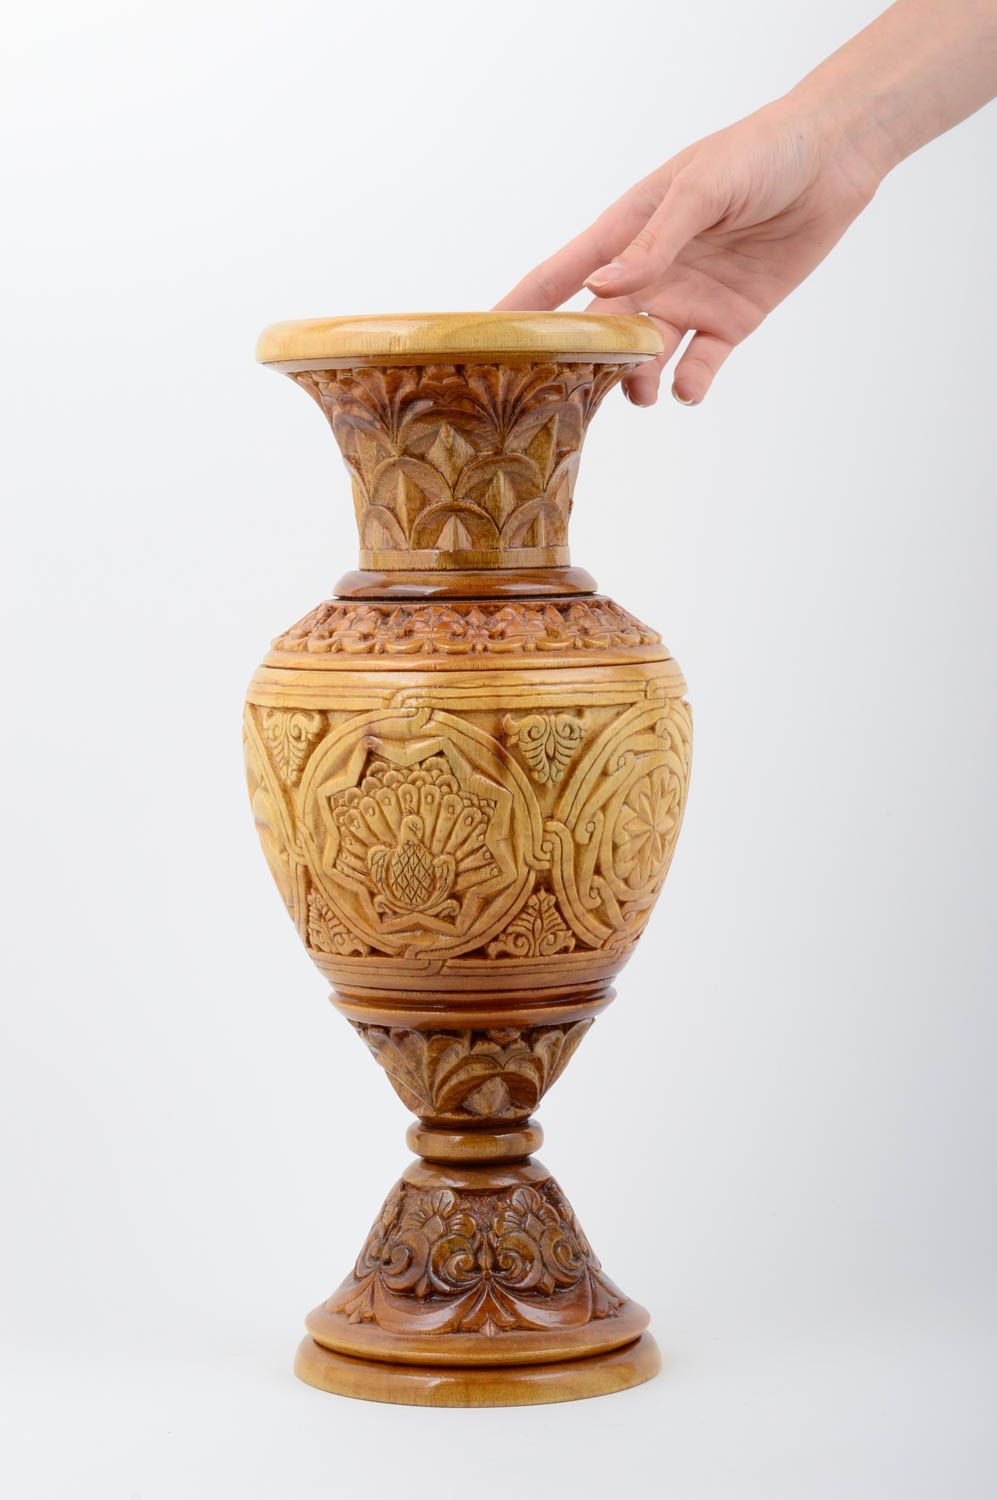 Large handmade wooden vase woodcarving ideas the living room gift ideas photo 5